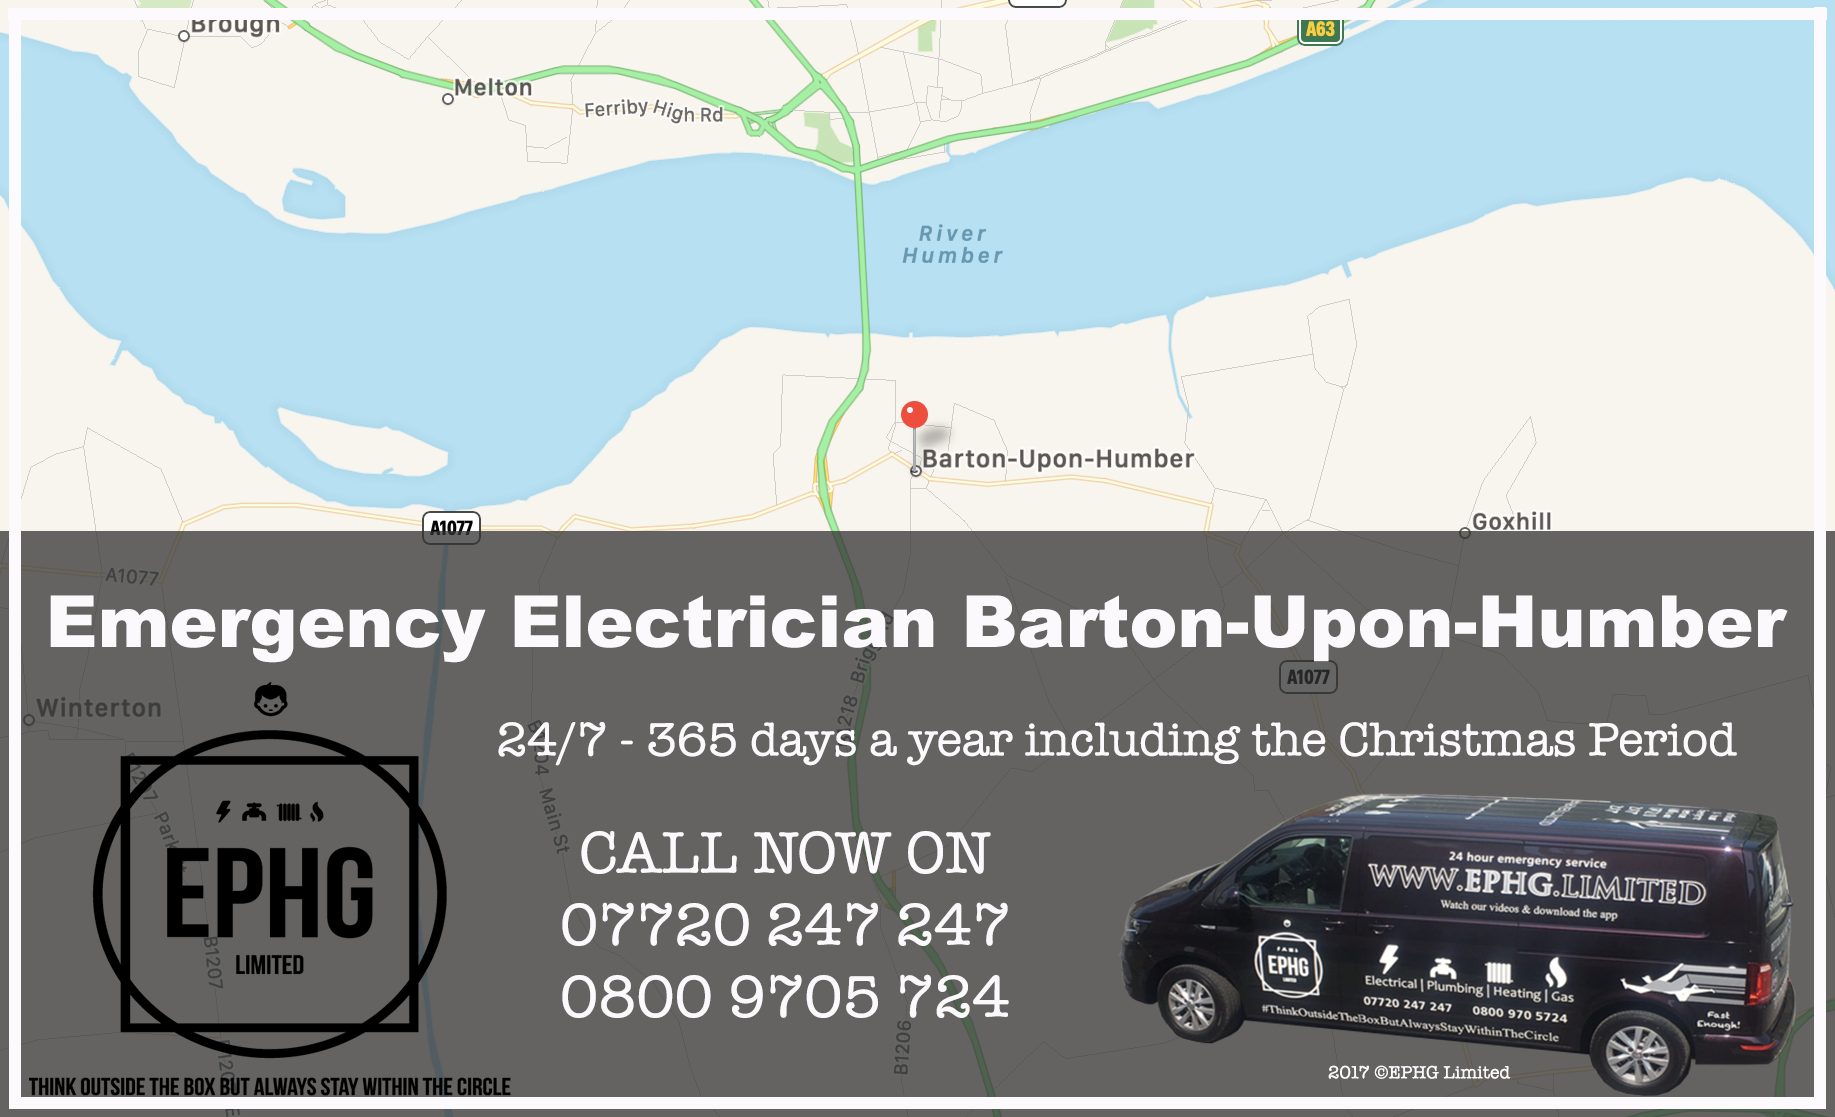 Emergency Electrician Barton-Upon-Humber